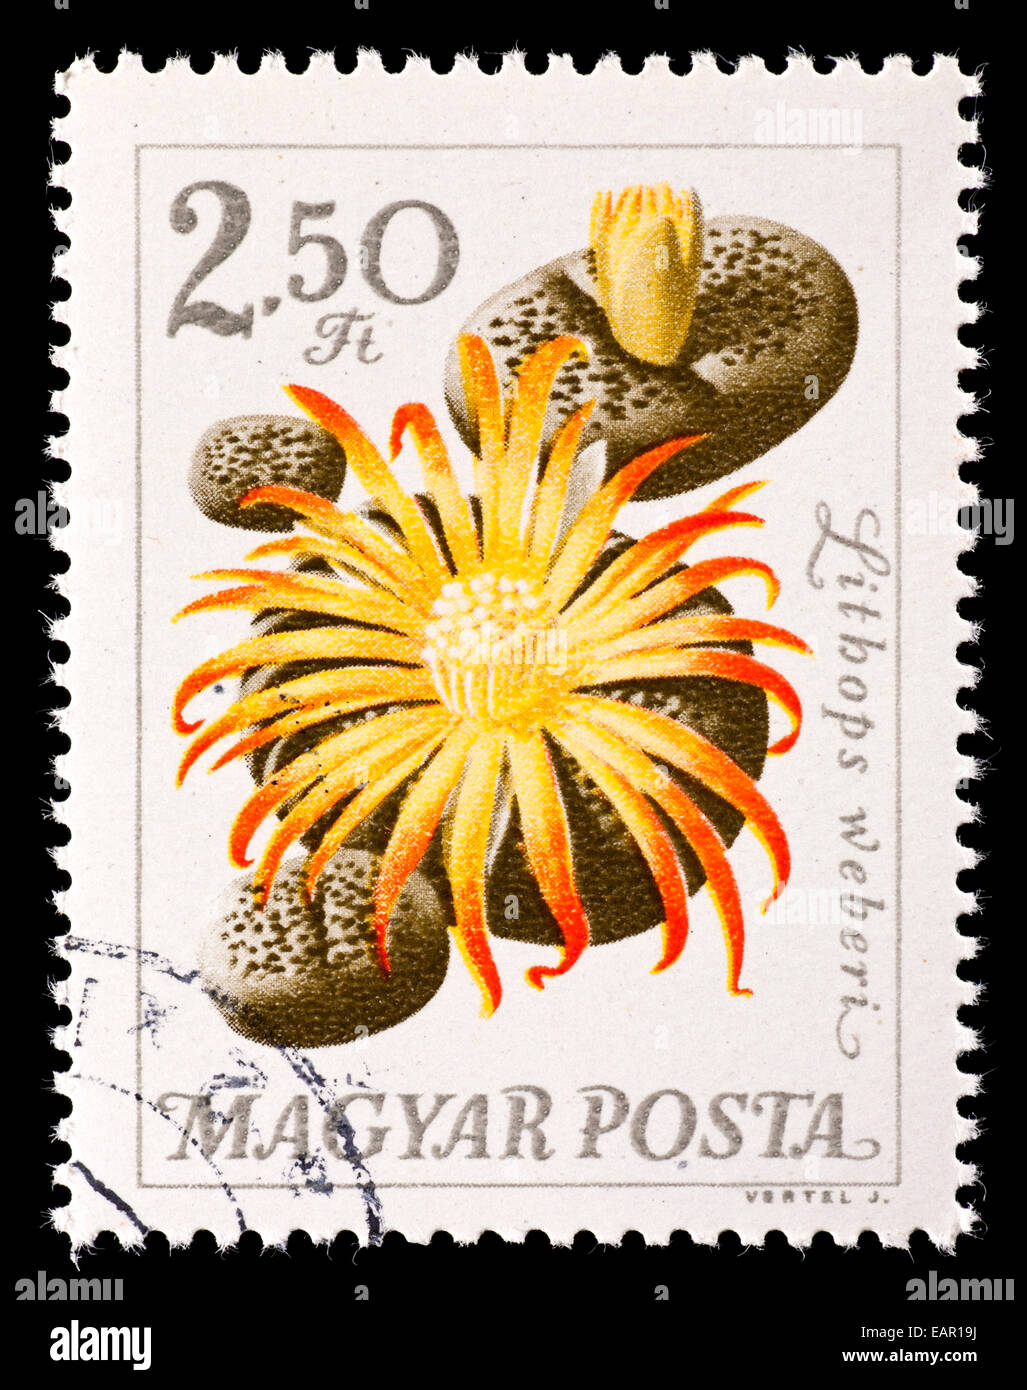 Postage stamp from Hungary depicting living stones flowers (Lithops weberii) Stock Photo